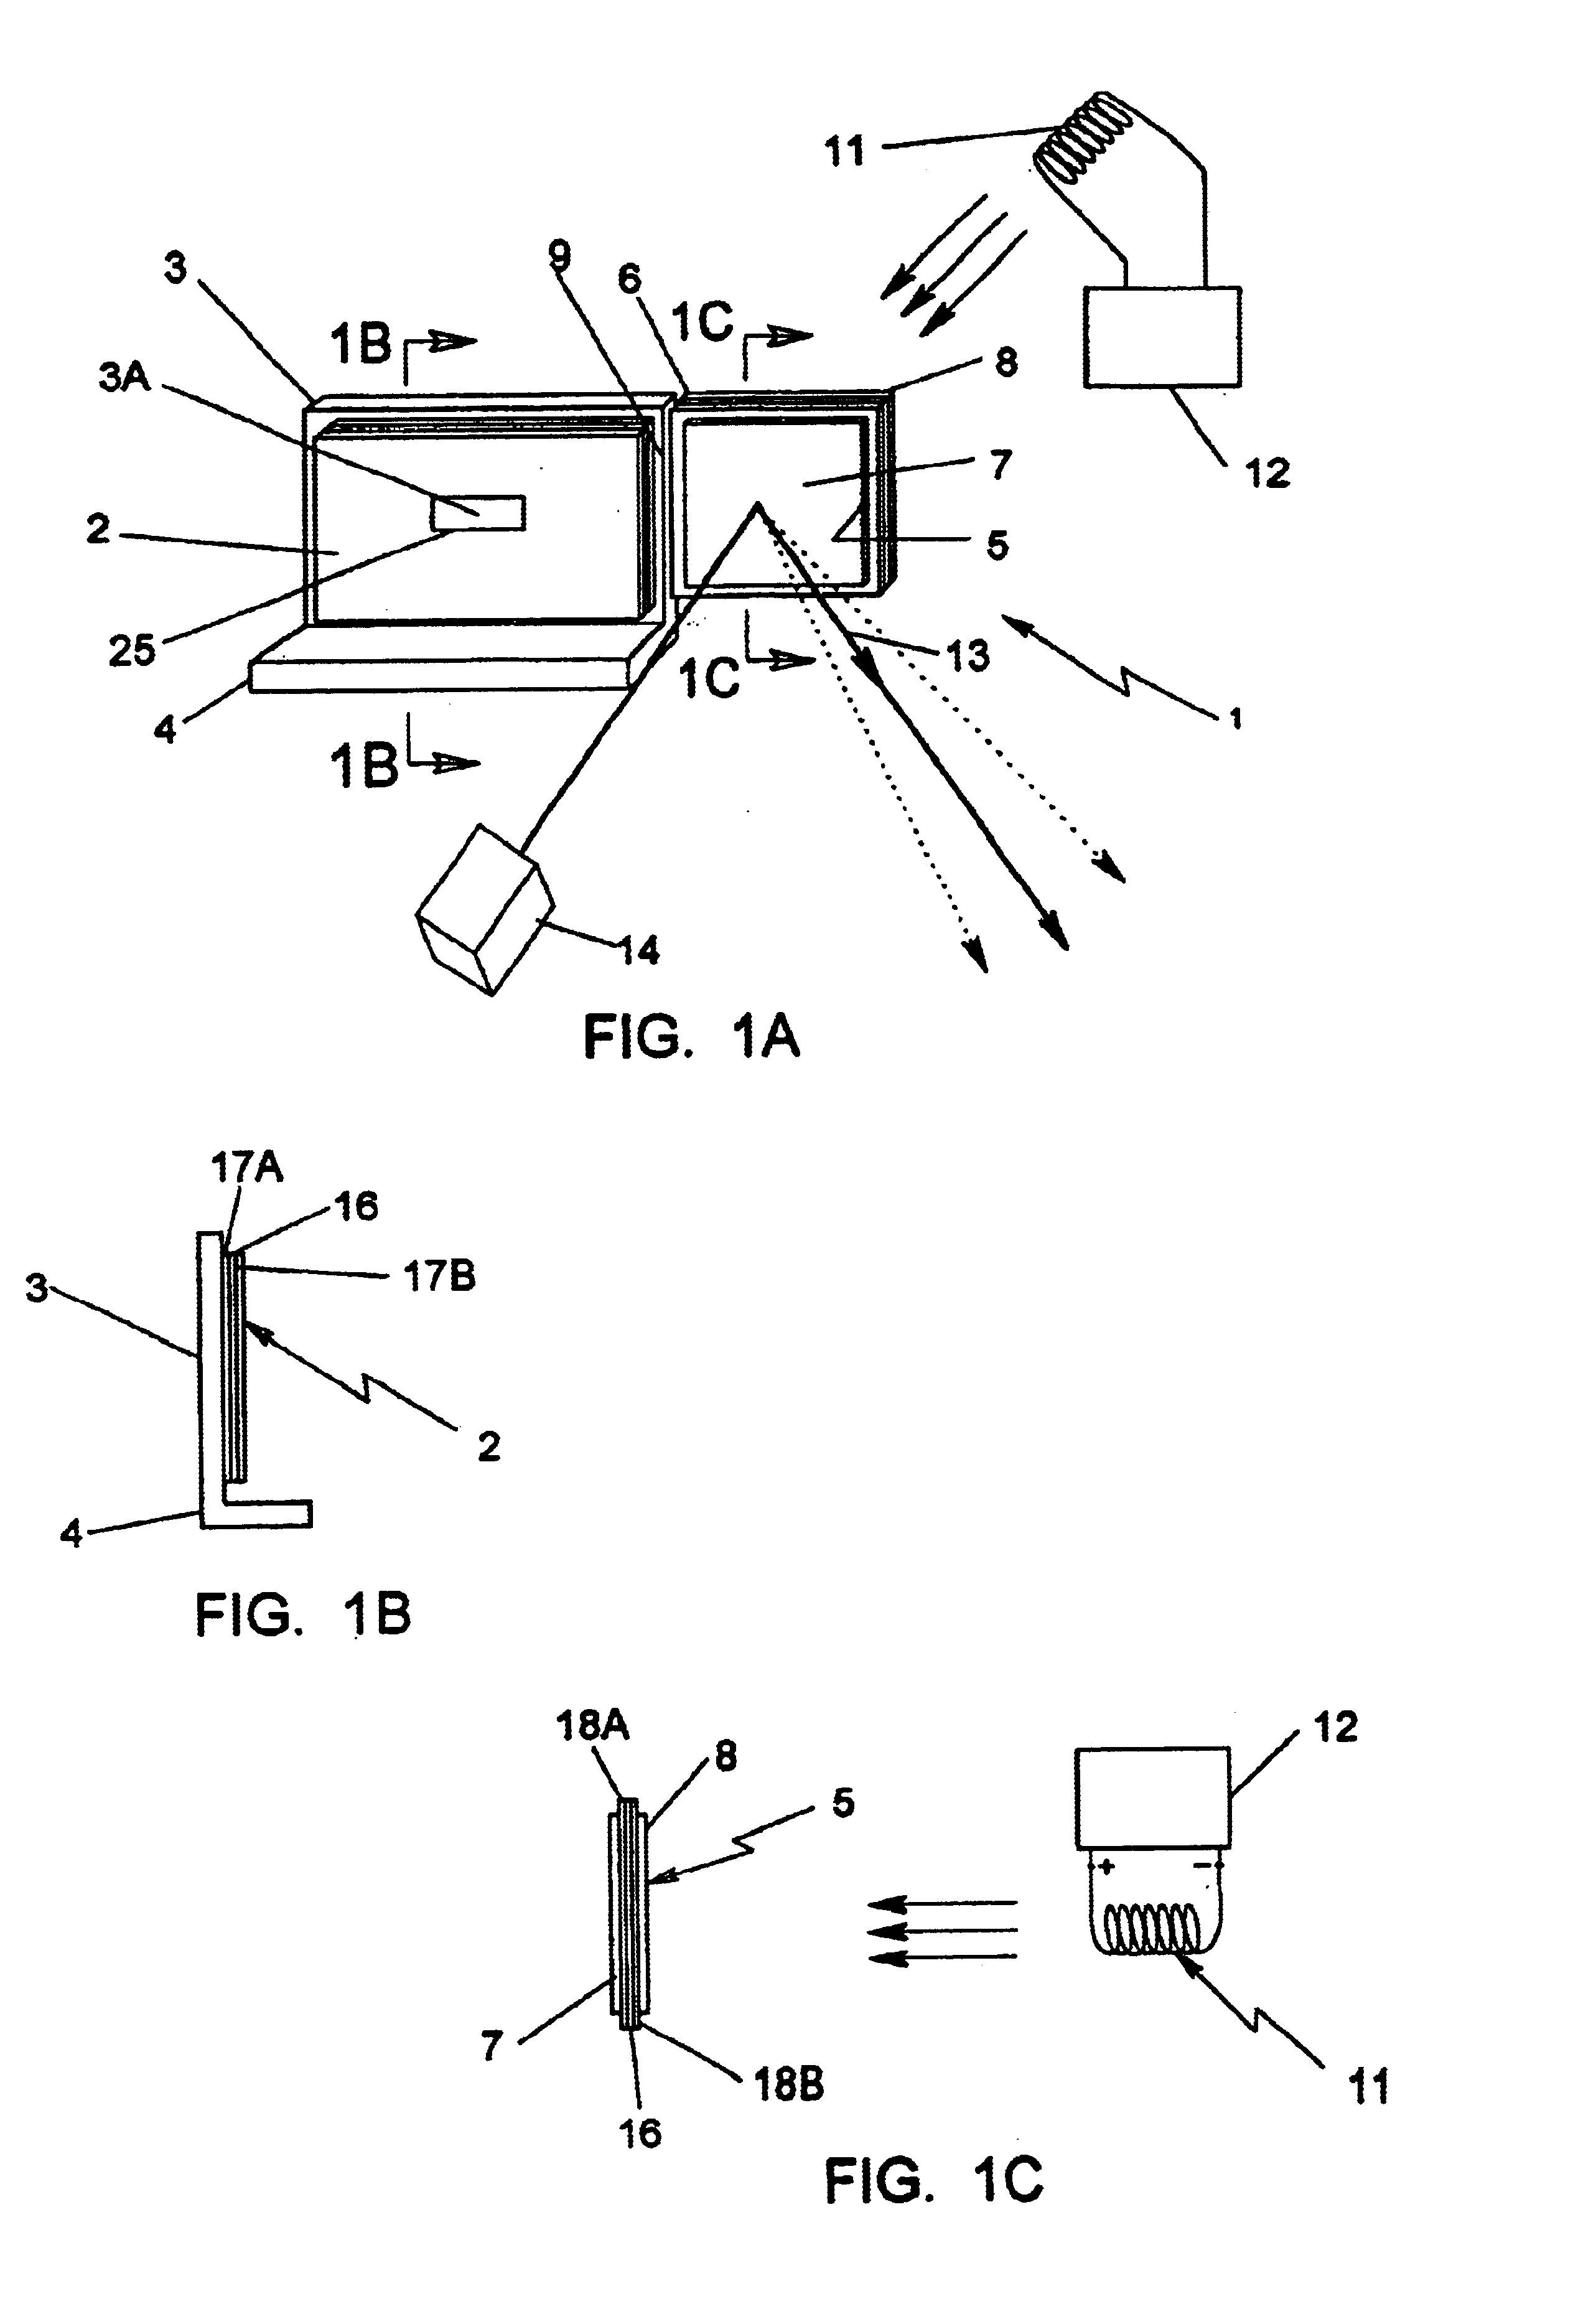 Laser beam scanning device employing a scanning element having a flexible photo-etched gap region disposed between an anchored base portion and a light beam deflecting portion having a natural frequency of oscillation tuned by the physical dimensions of said flexible photo-etched gap region and forcibly oscillated about a fixed pivot point at an electronically-controlled frequency of oscillation substantially different from said natural resonant frequency of oscillation